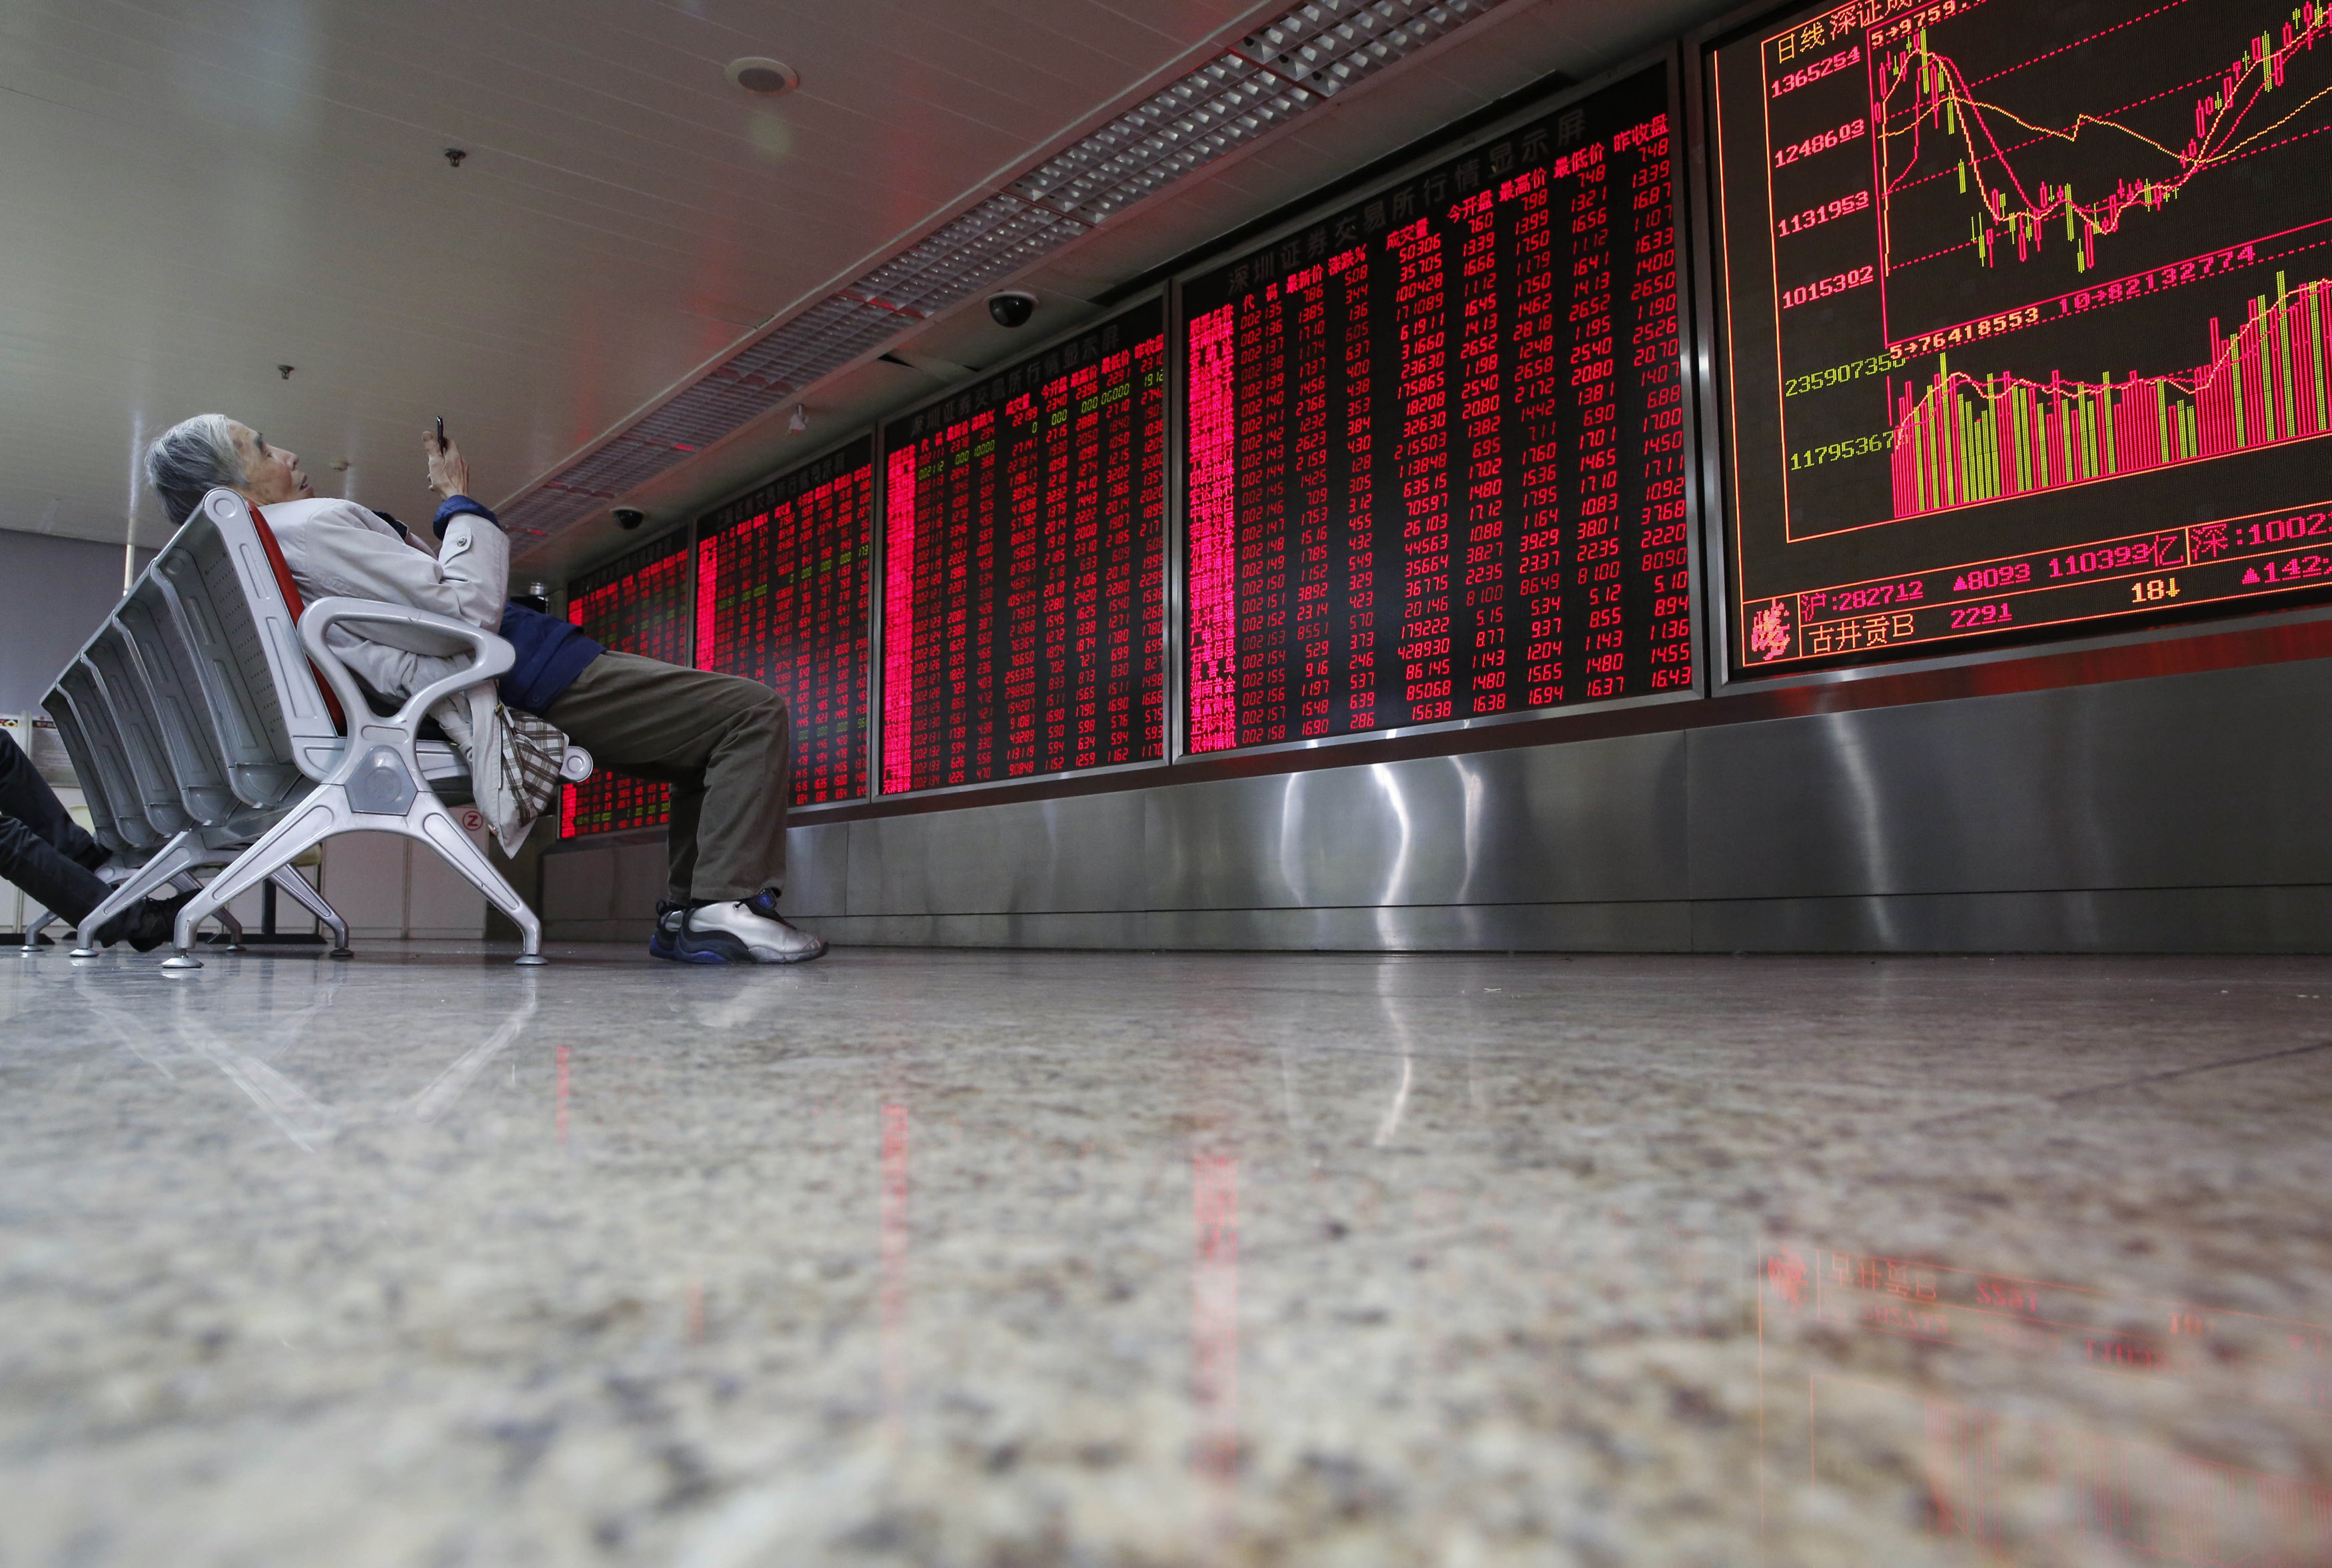 An investor checks stock information on his mobile phone in front of an electronic board showing stock information at a brokerage house in Beijing, China, February 16, 2016.REUTERS/Kim Kyung-Hoon